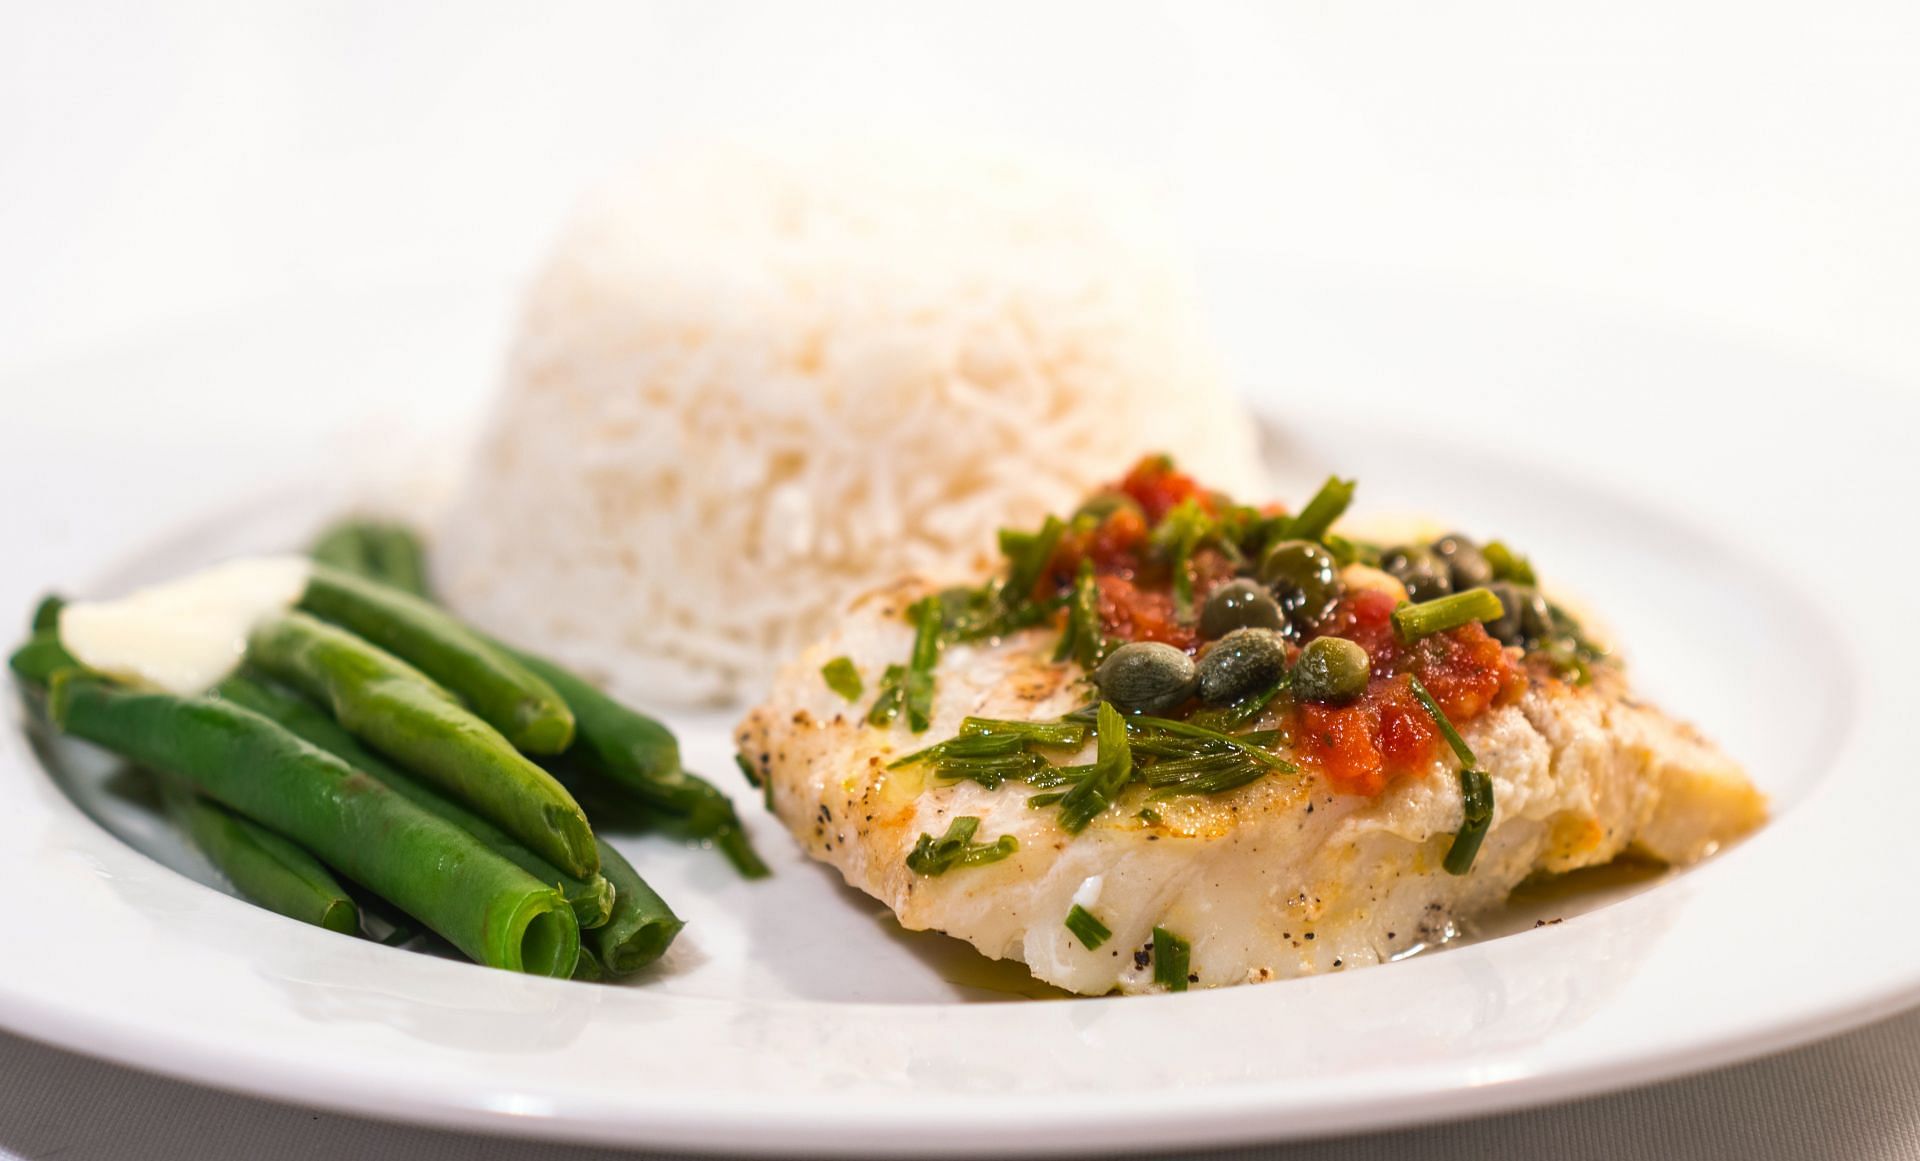 Cod is among the best high-protein low-calorie foods. (Image via Unsplash/David B Townsend)